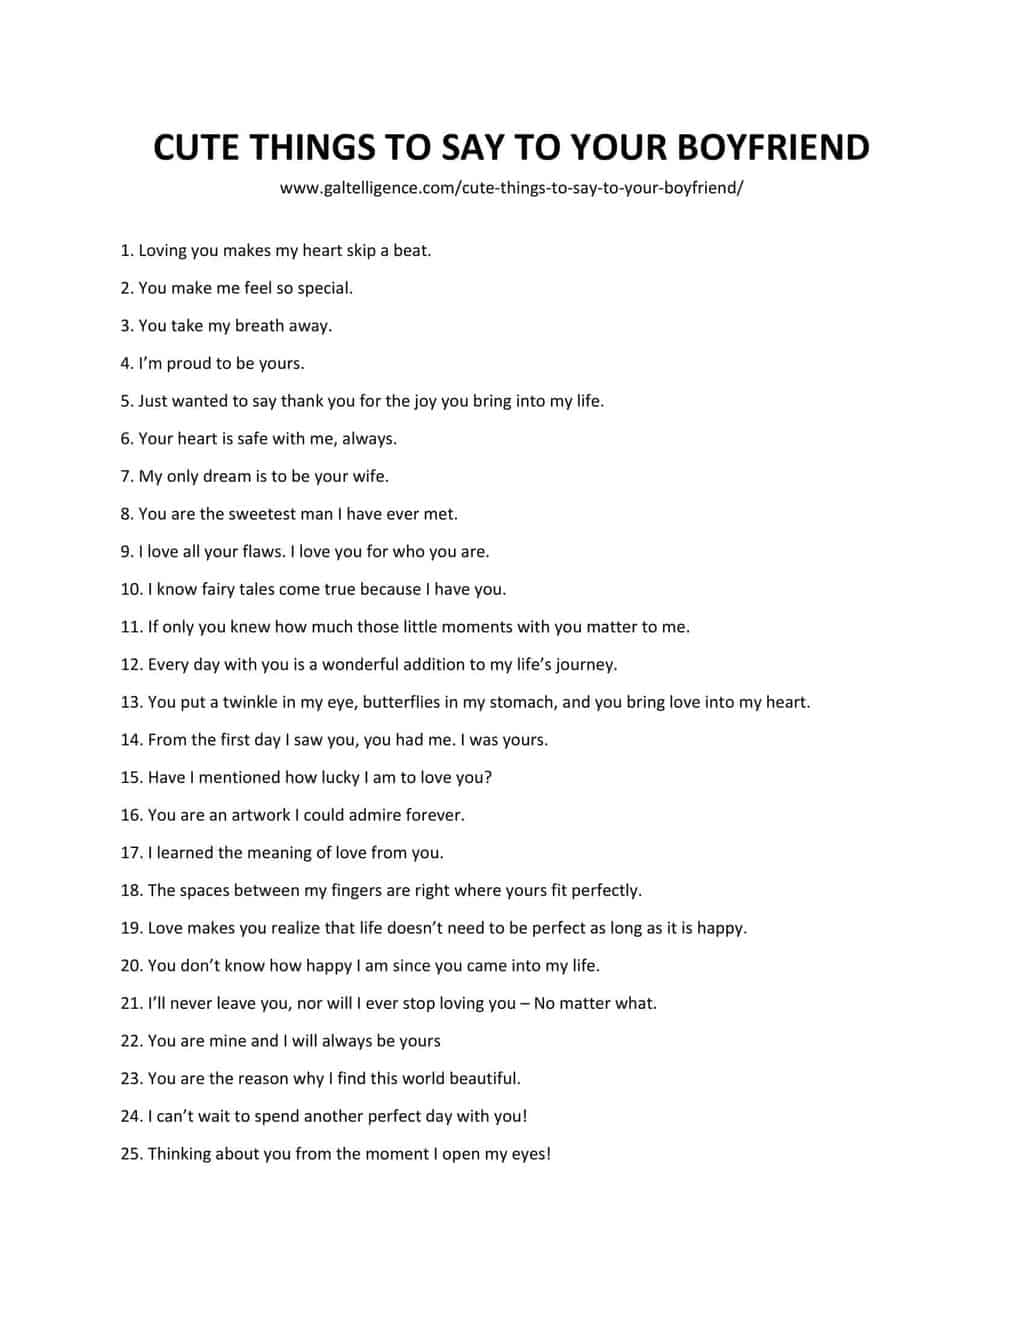 Downloadable and Printable List of Cute Things To Say To Your Boyfriend.